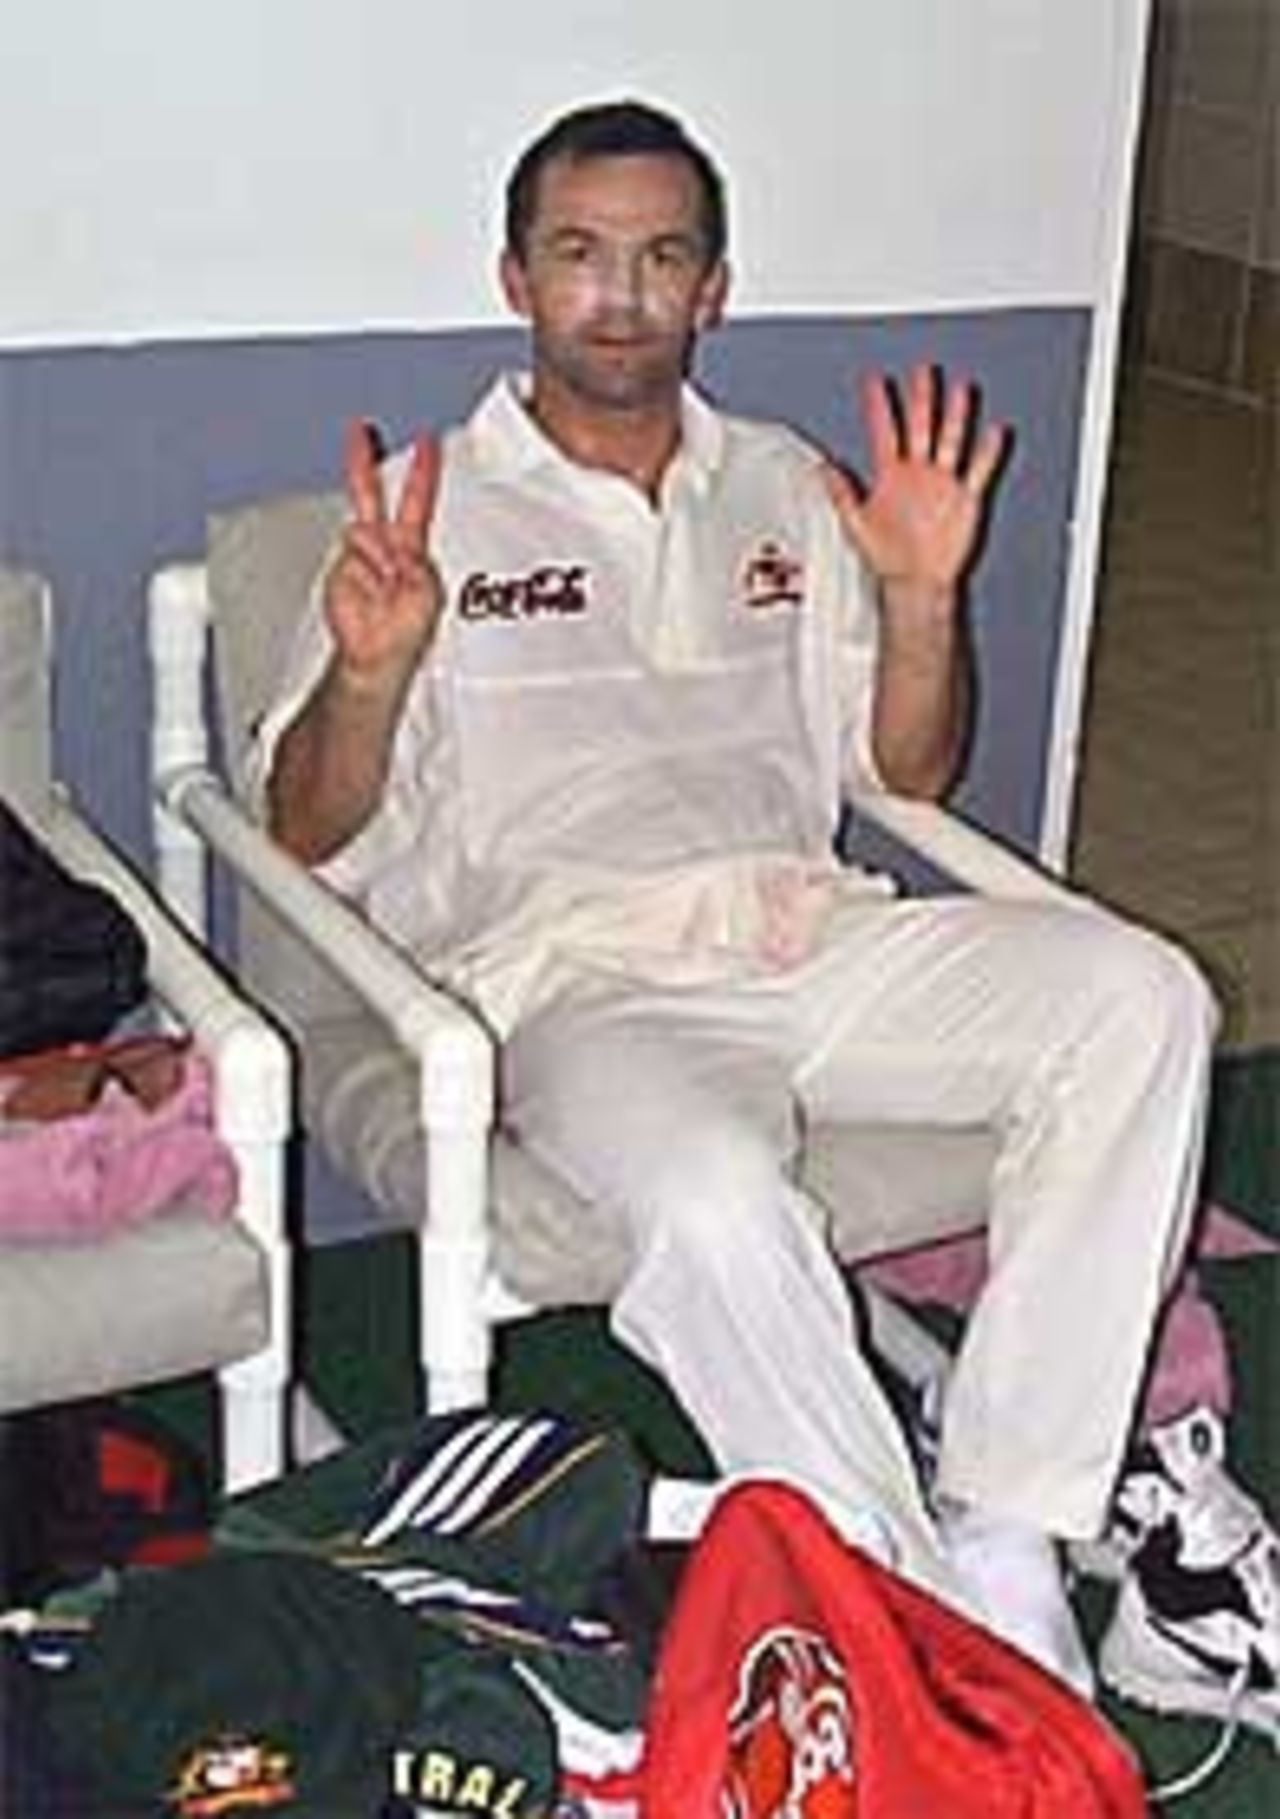 Adam Dale rests after his 7 wickets against the West Indies Board XI in Antigua. February 1999.